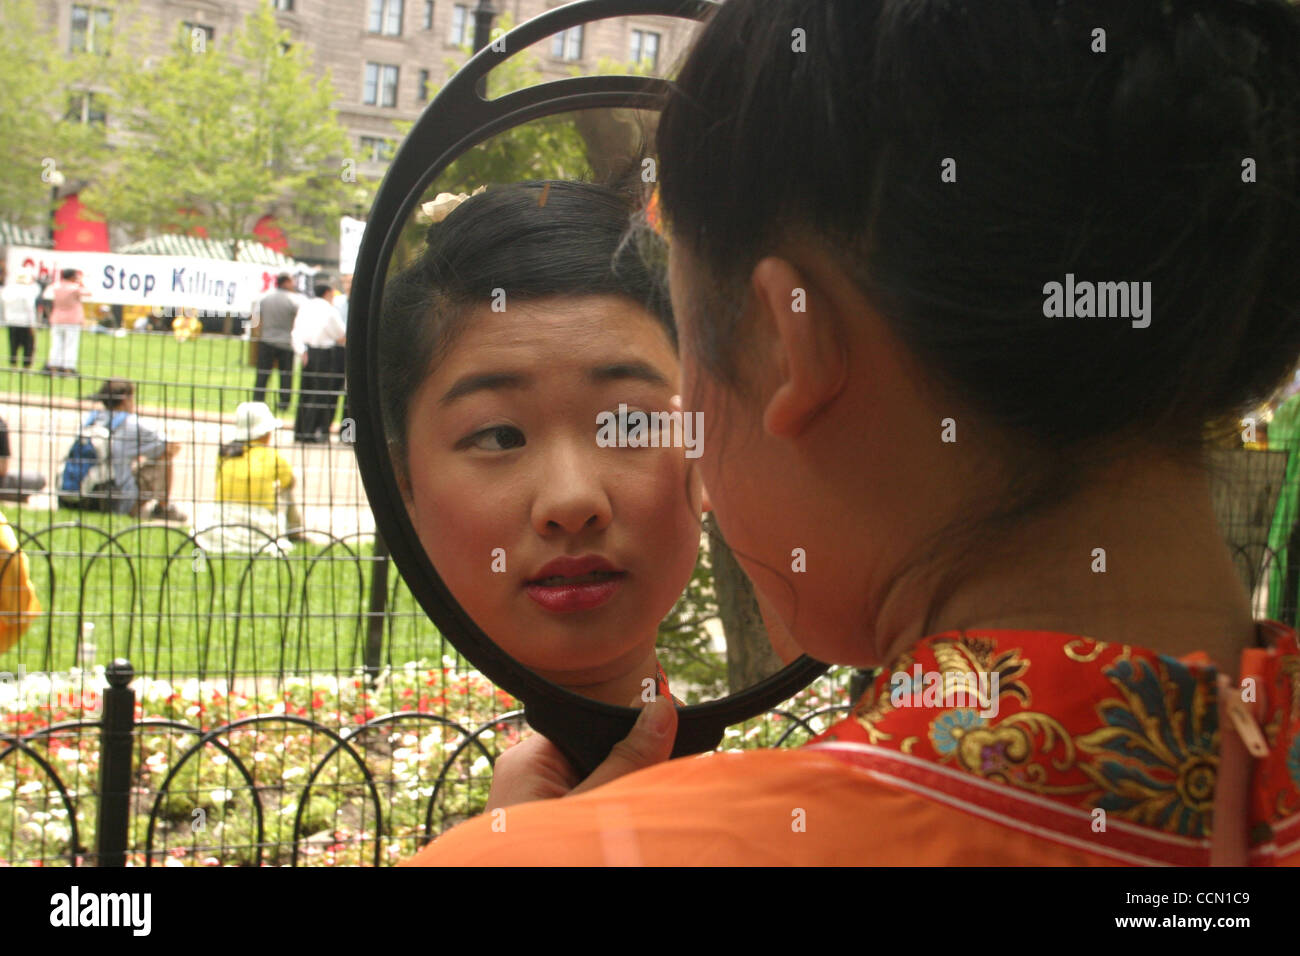 Jul 25, 2004; Boston, Ma, USA; Falun Gong practitioners bring awareness to the persecution & torture they face in China. A practitioner gets ready for the protest in Copley Square. Stock Photo